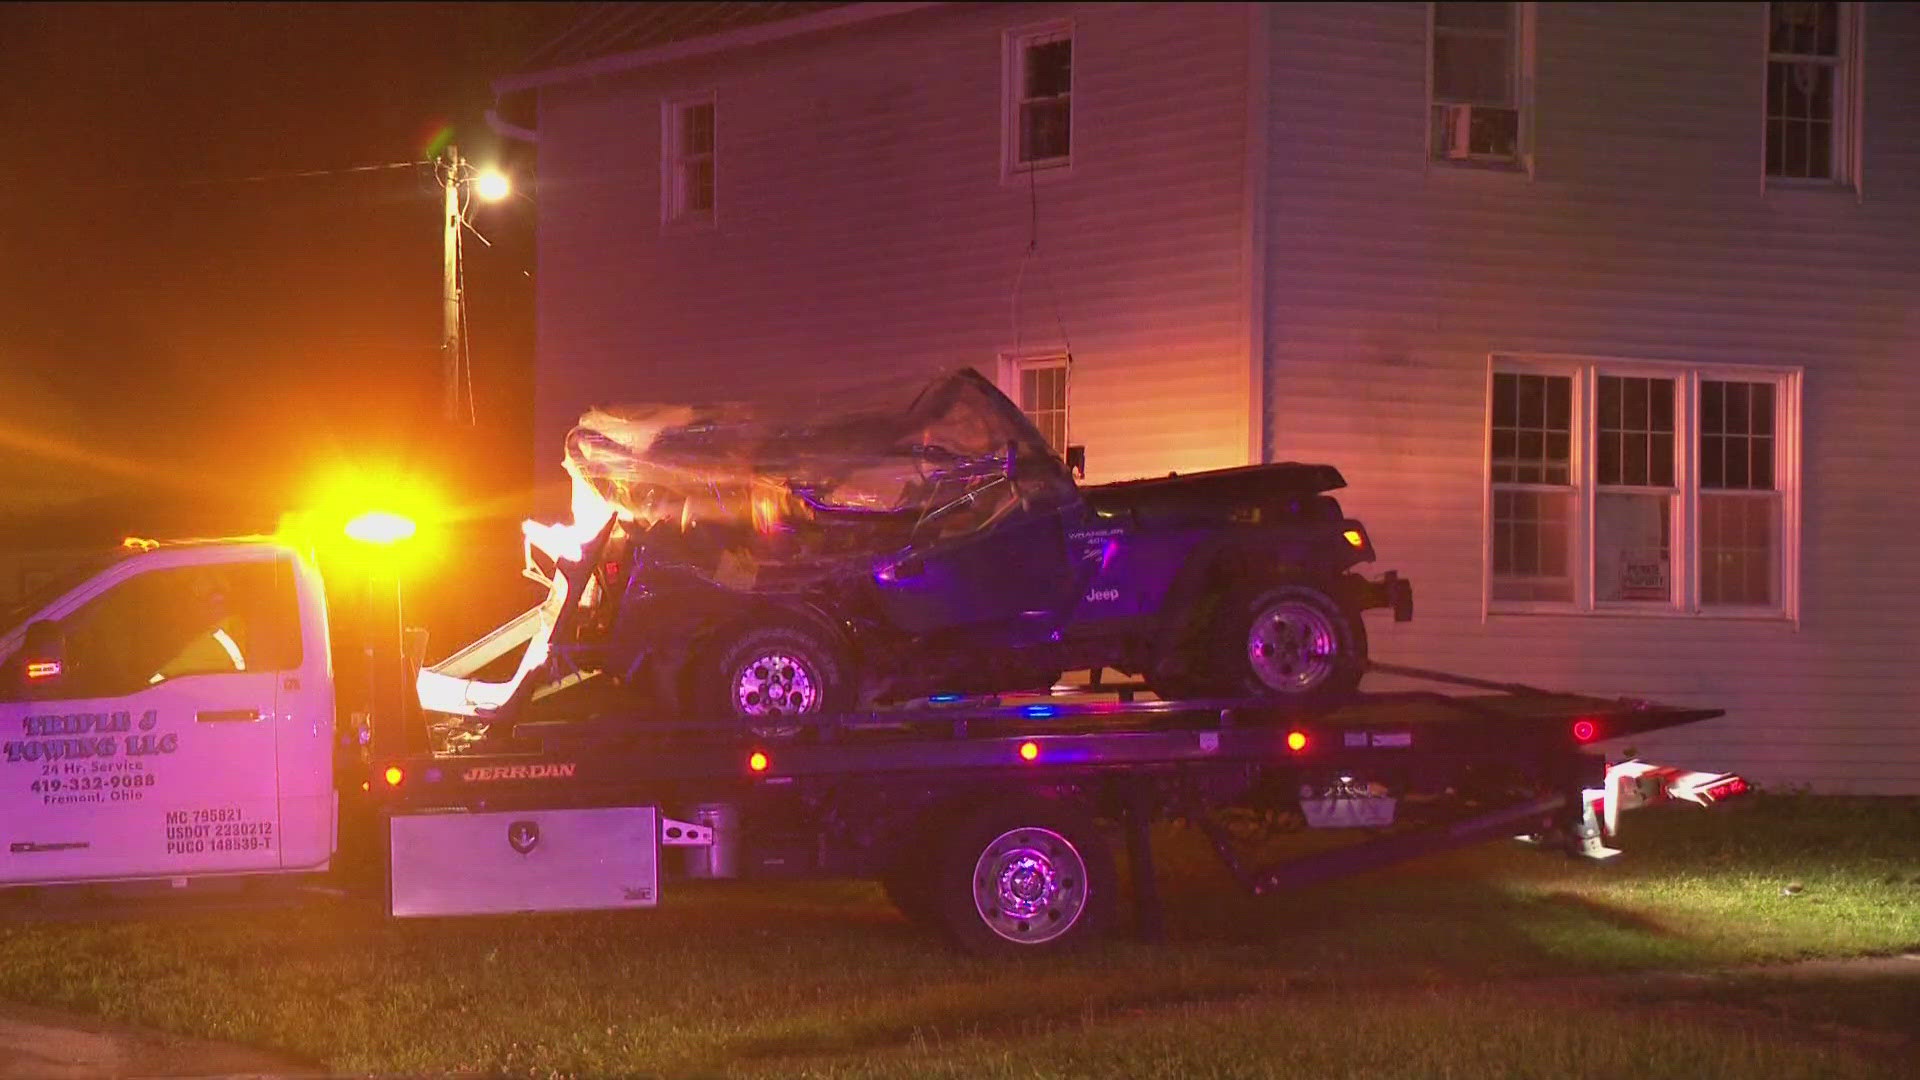 Ohio State Highway Patrol officials told WTOL the driver lost control of his car and went off the road before hitting a tree.